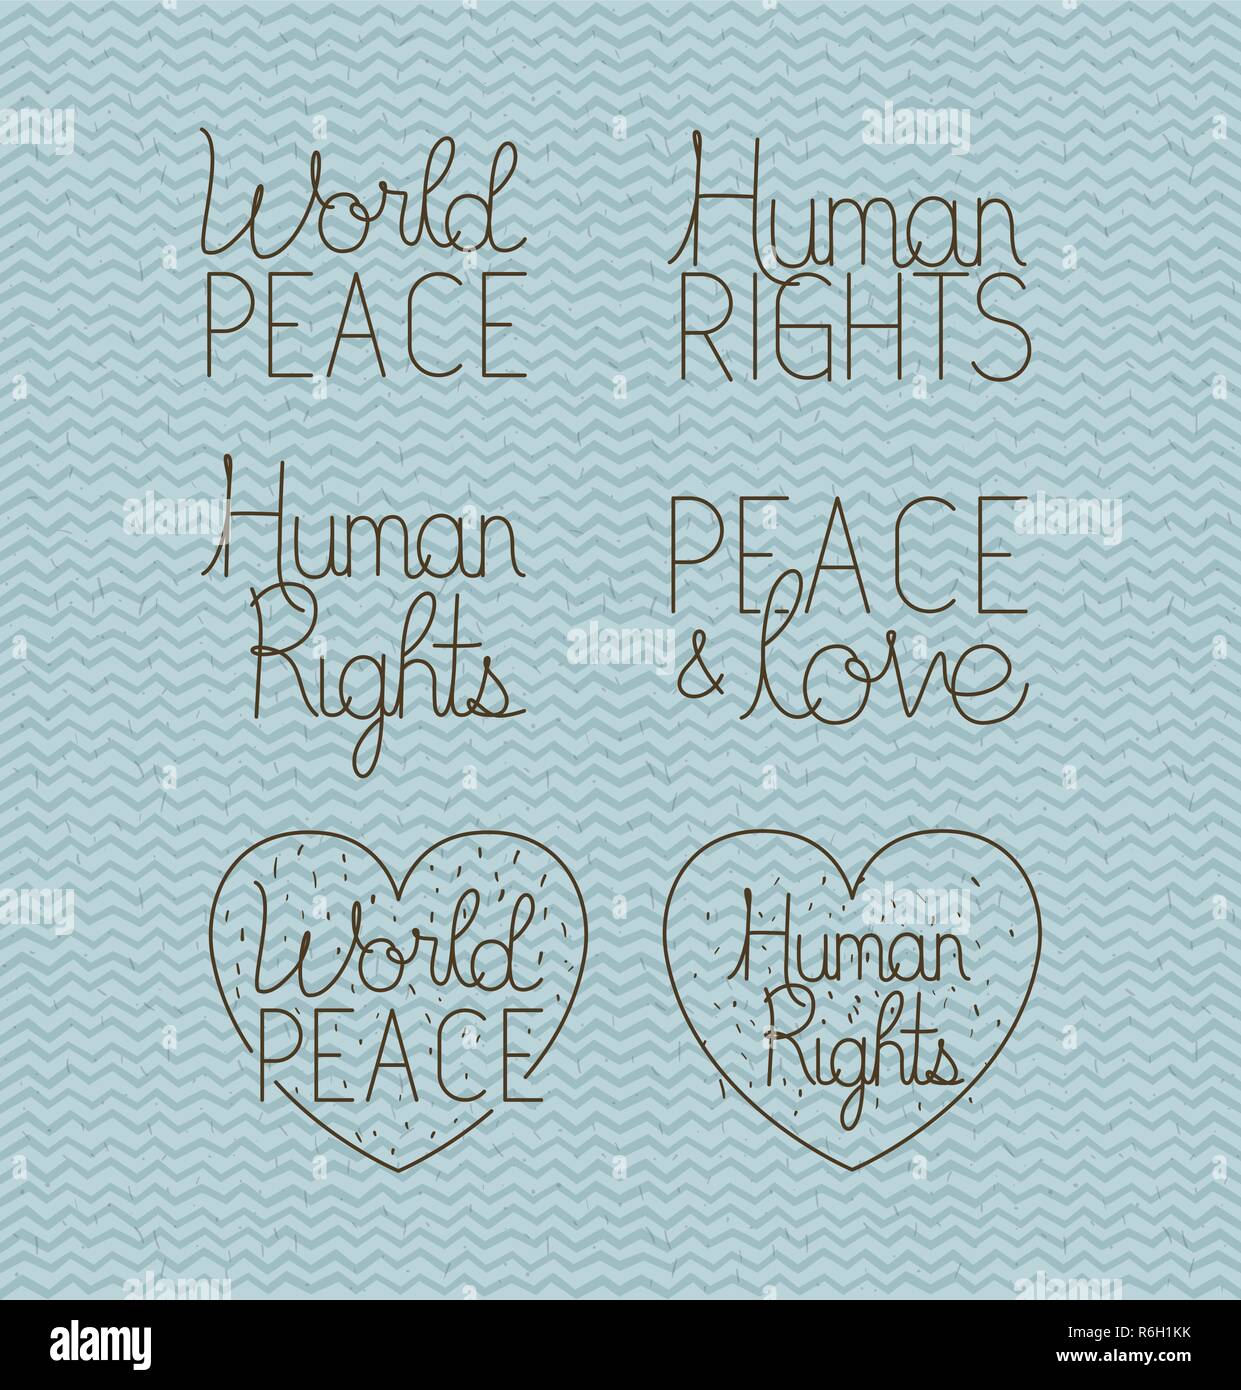 human rights and peace set letterings Stock Vector